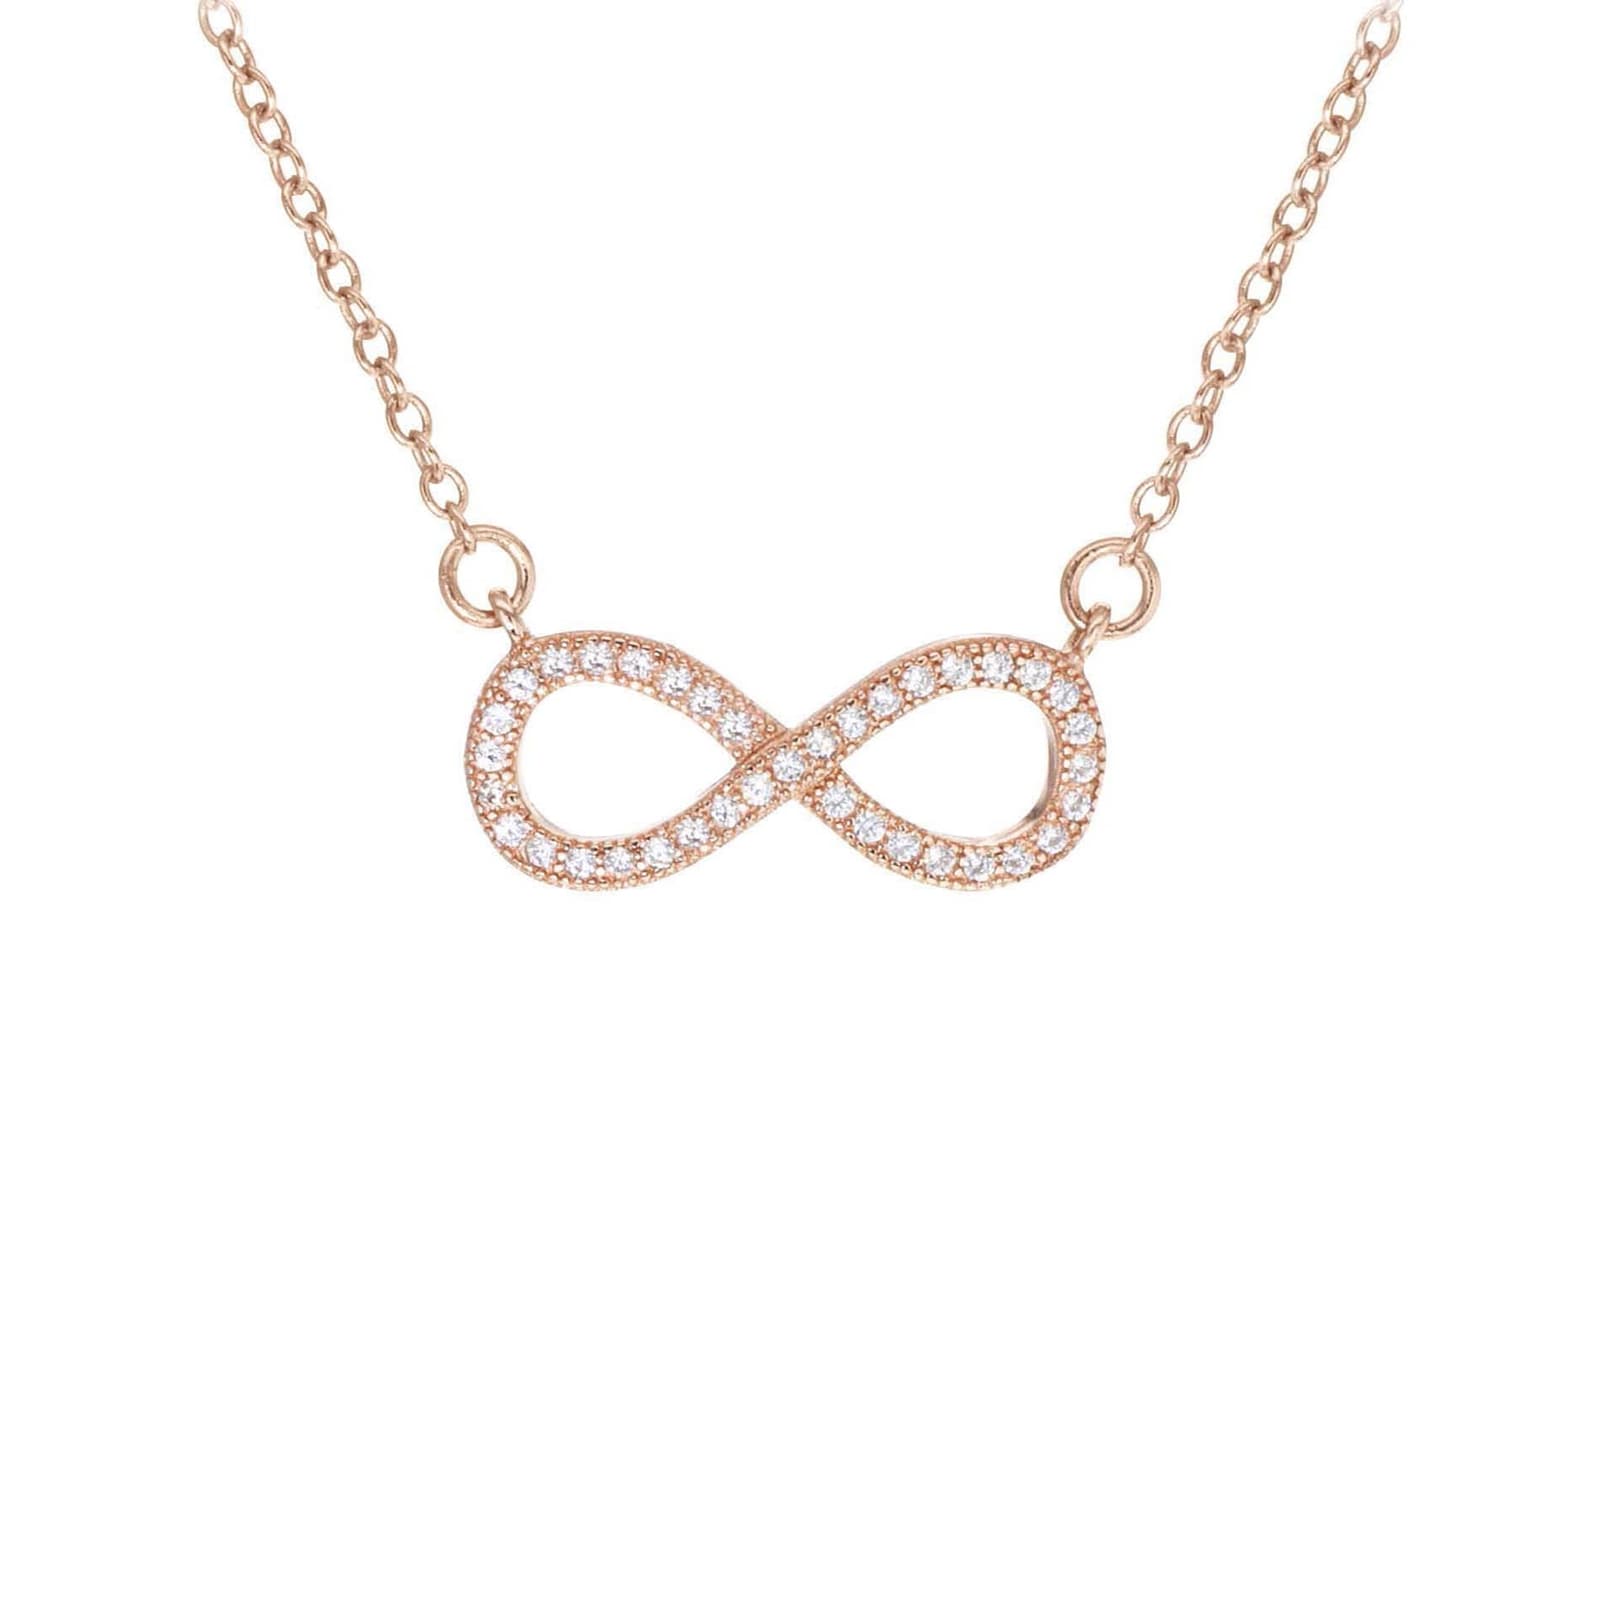 Rose Gold Necklaces for Women, Diamond & Rose Gold Pendants for Sale UK ...